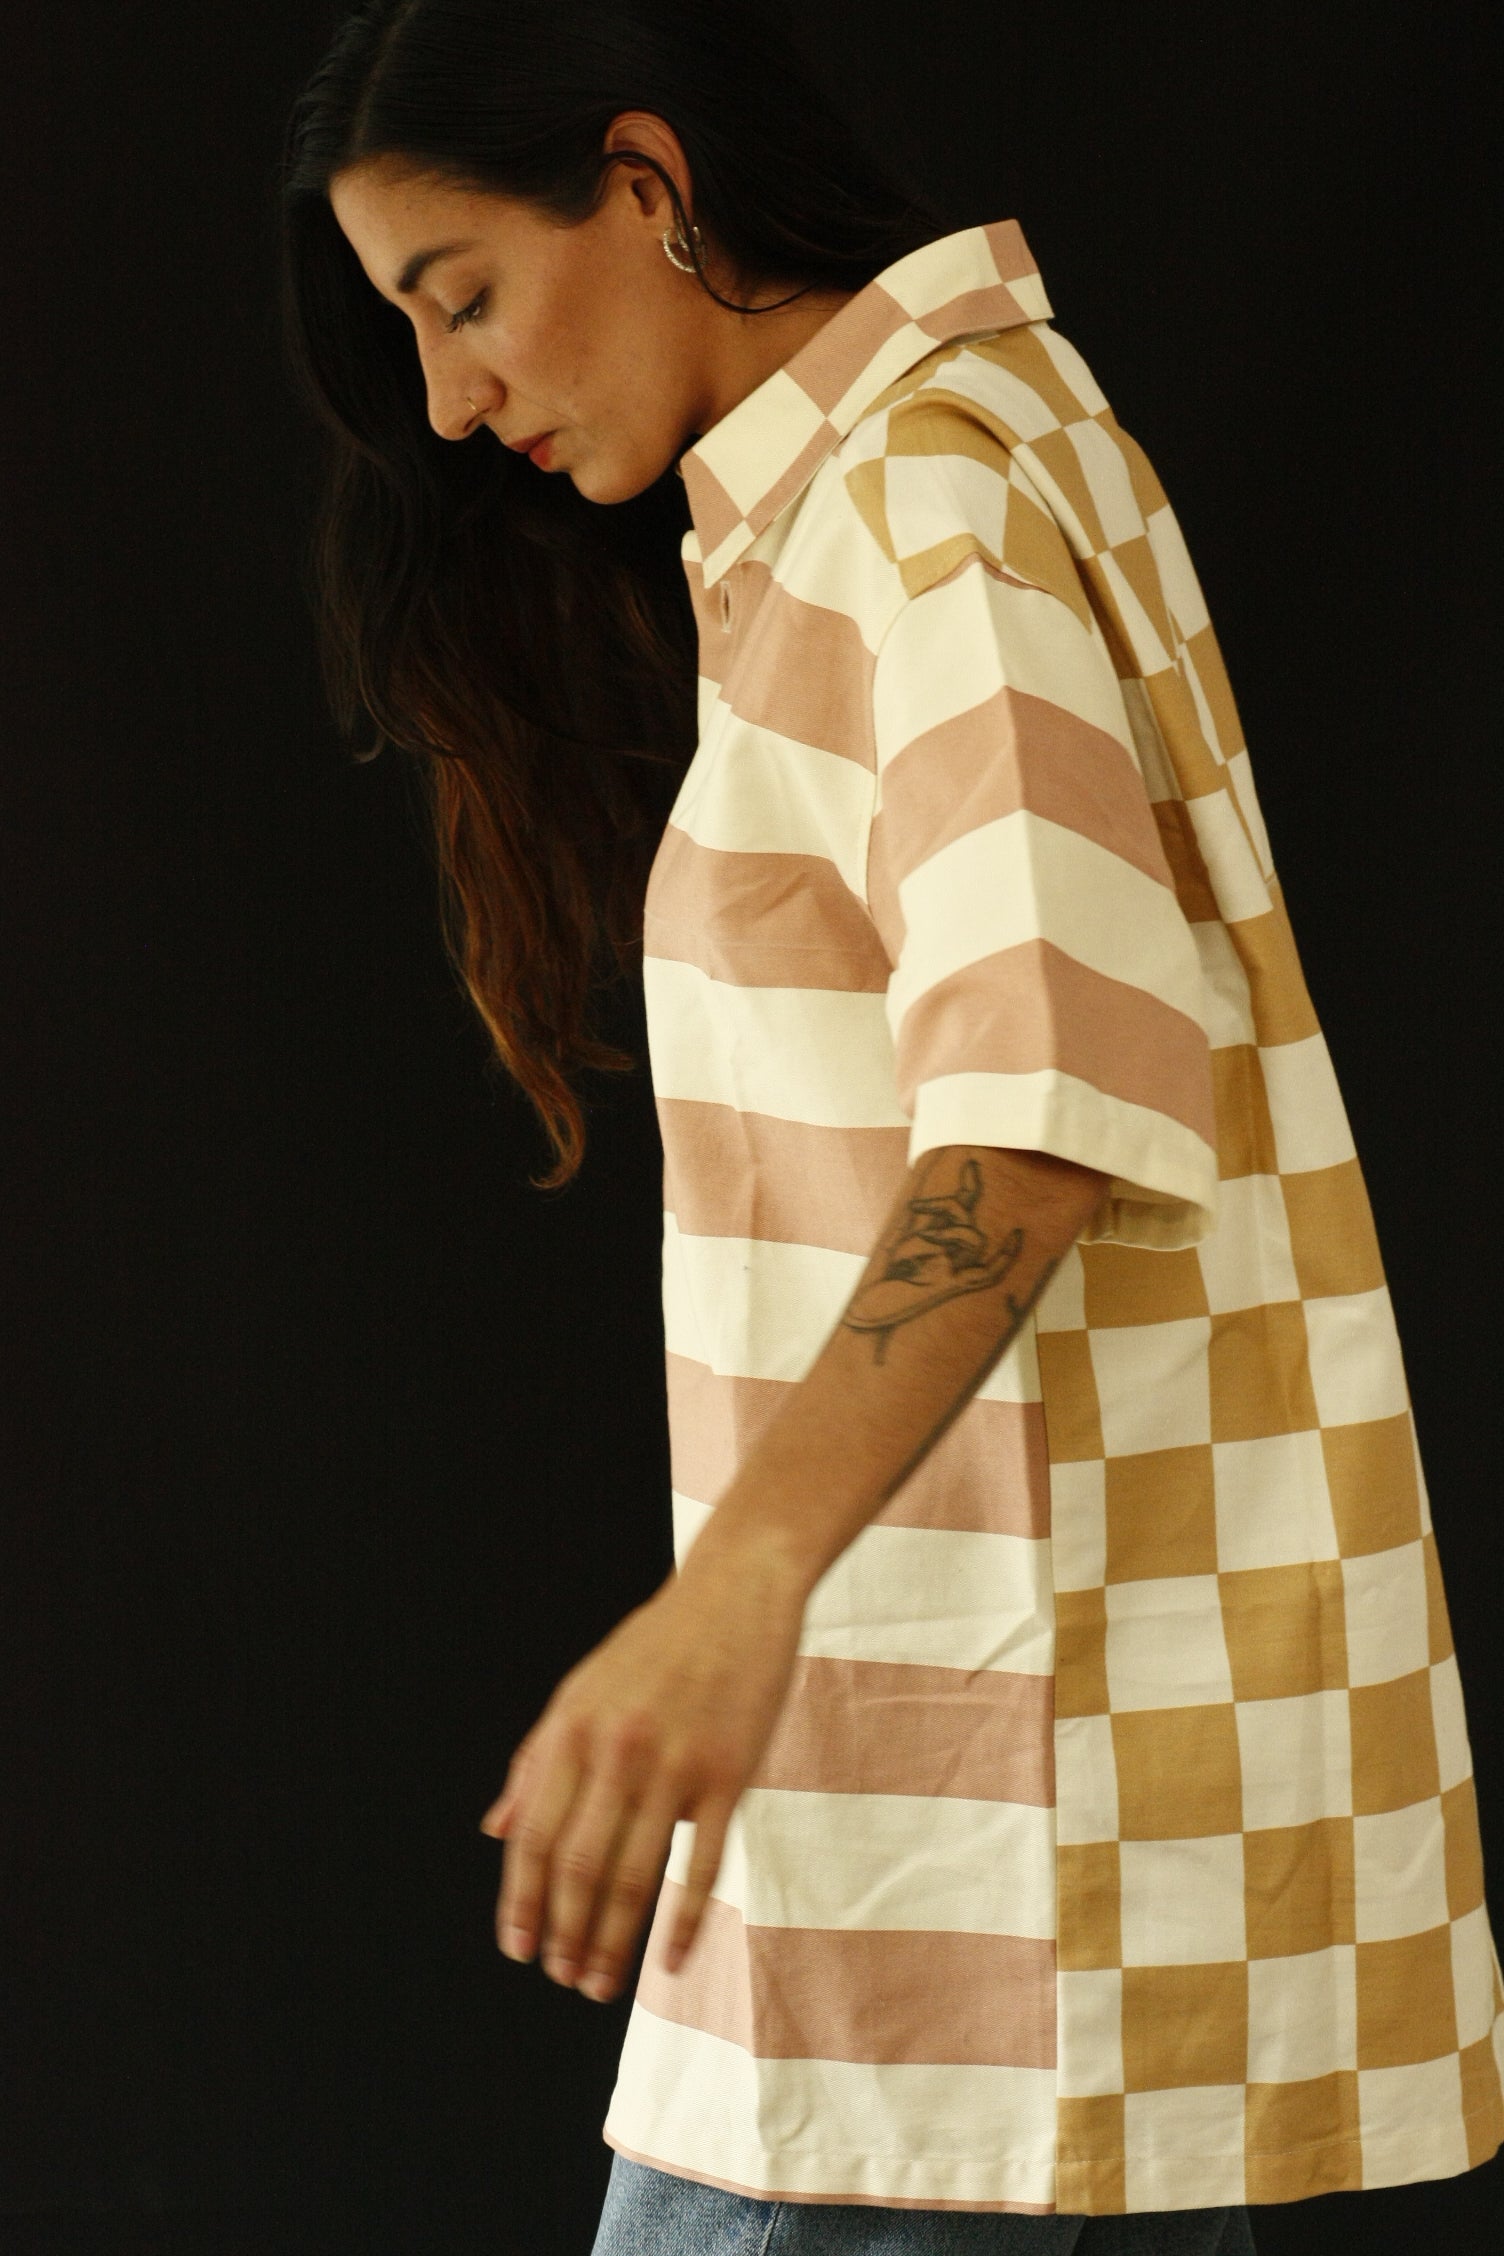 The fabric of this garment was found in Shibuya, Tokyo. The design was inspired by the street style, art and architecture of Japan. Deadstock fabrics put together to create this unique unisex shirt. Wear it with pants or as a dress. INGREDIENTS 100% cotton Wood buttons Ethically made in Ecuador. Sustainable fashion, handmade, natural fibers, vintage textiles and upcycled materials.